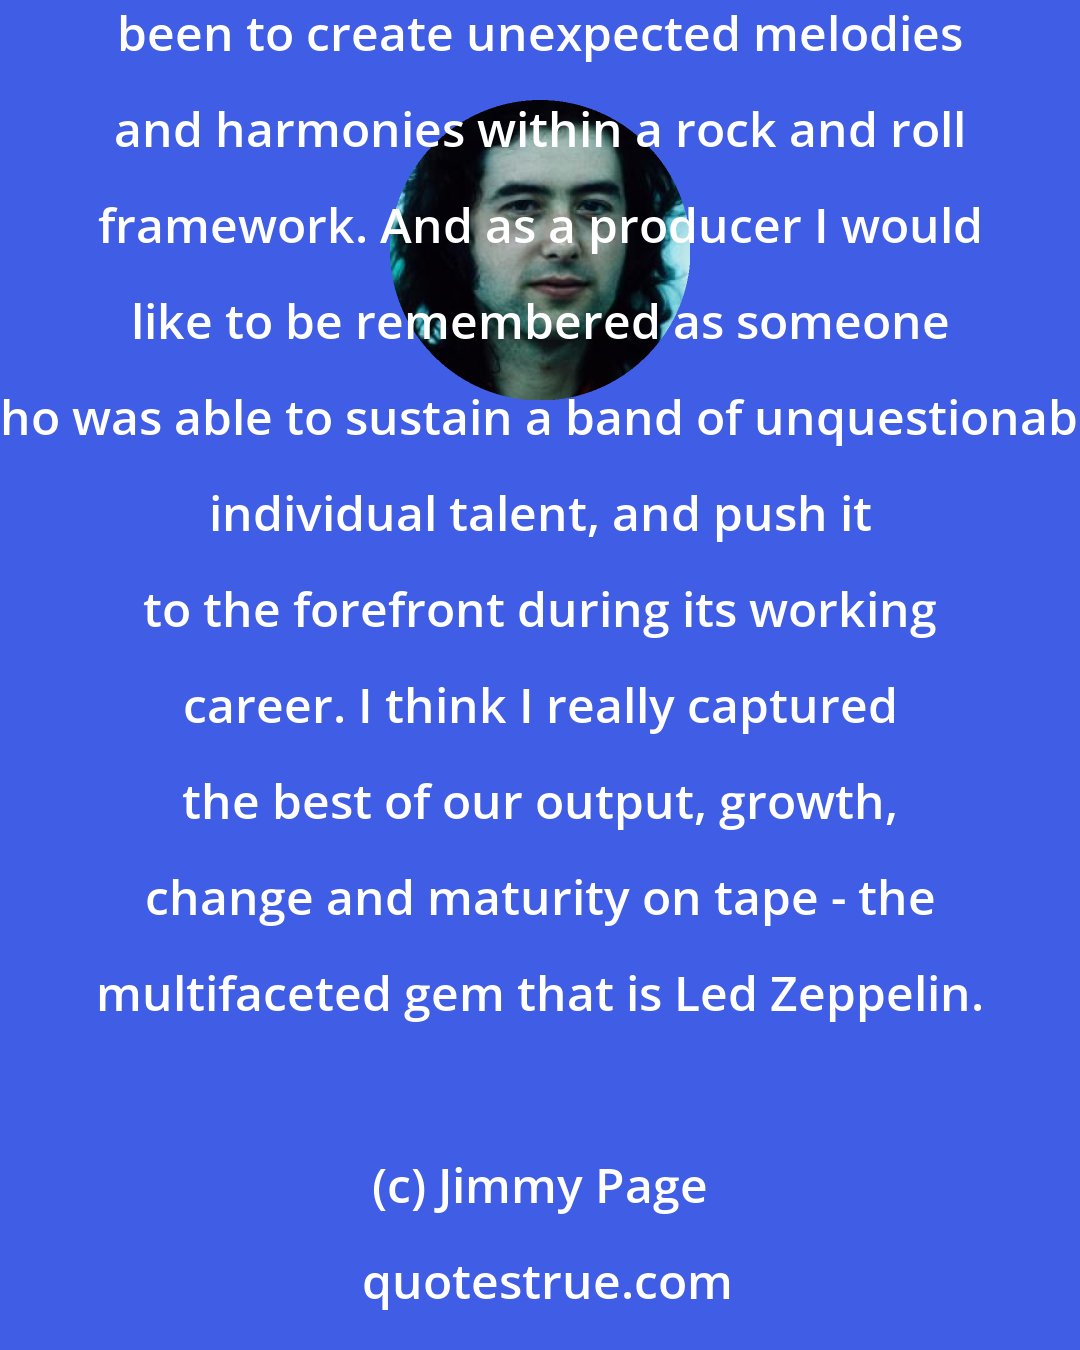 Jimmy Page: Many people think of me as just a riff guitarist, but I think of myself in broader terms. As a musician I think my greatest achievement has been to create unexpected melodies and harmonies within a rock and roll framework. And as a producer I would like to be remembered as someone who was able to sustain a band of unquestionable individual talent, and push it to the forefront during its working career. I think I really captured the best of our output, growth, change and maturity on tape - the multifaceted gem that is Led Zeppelin.